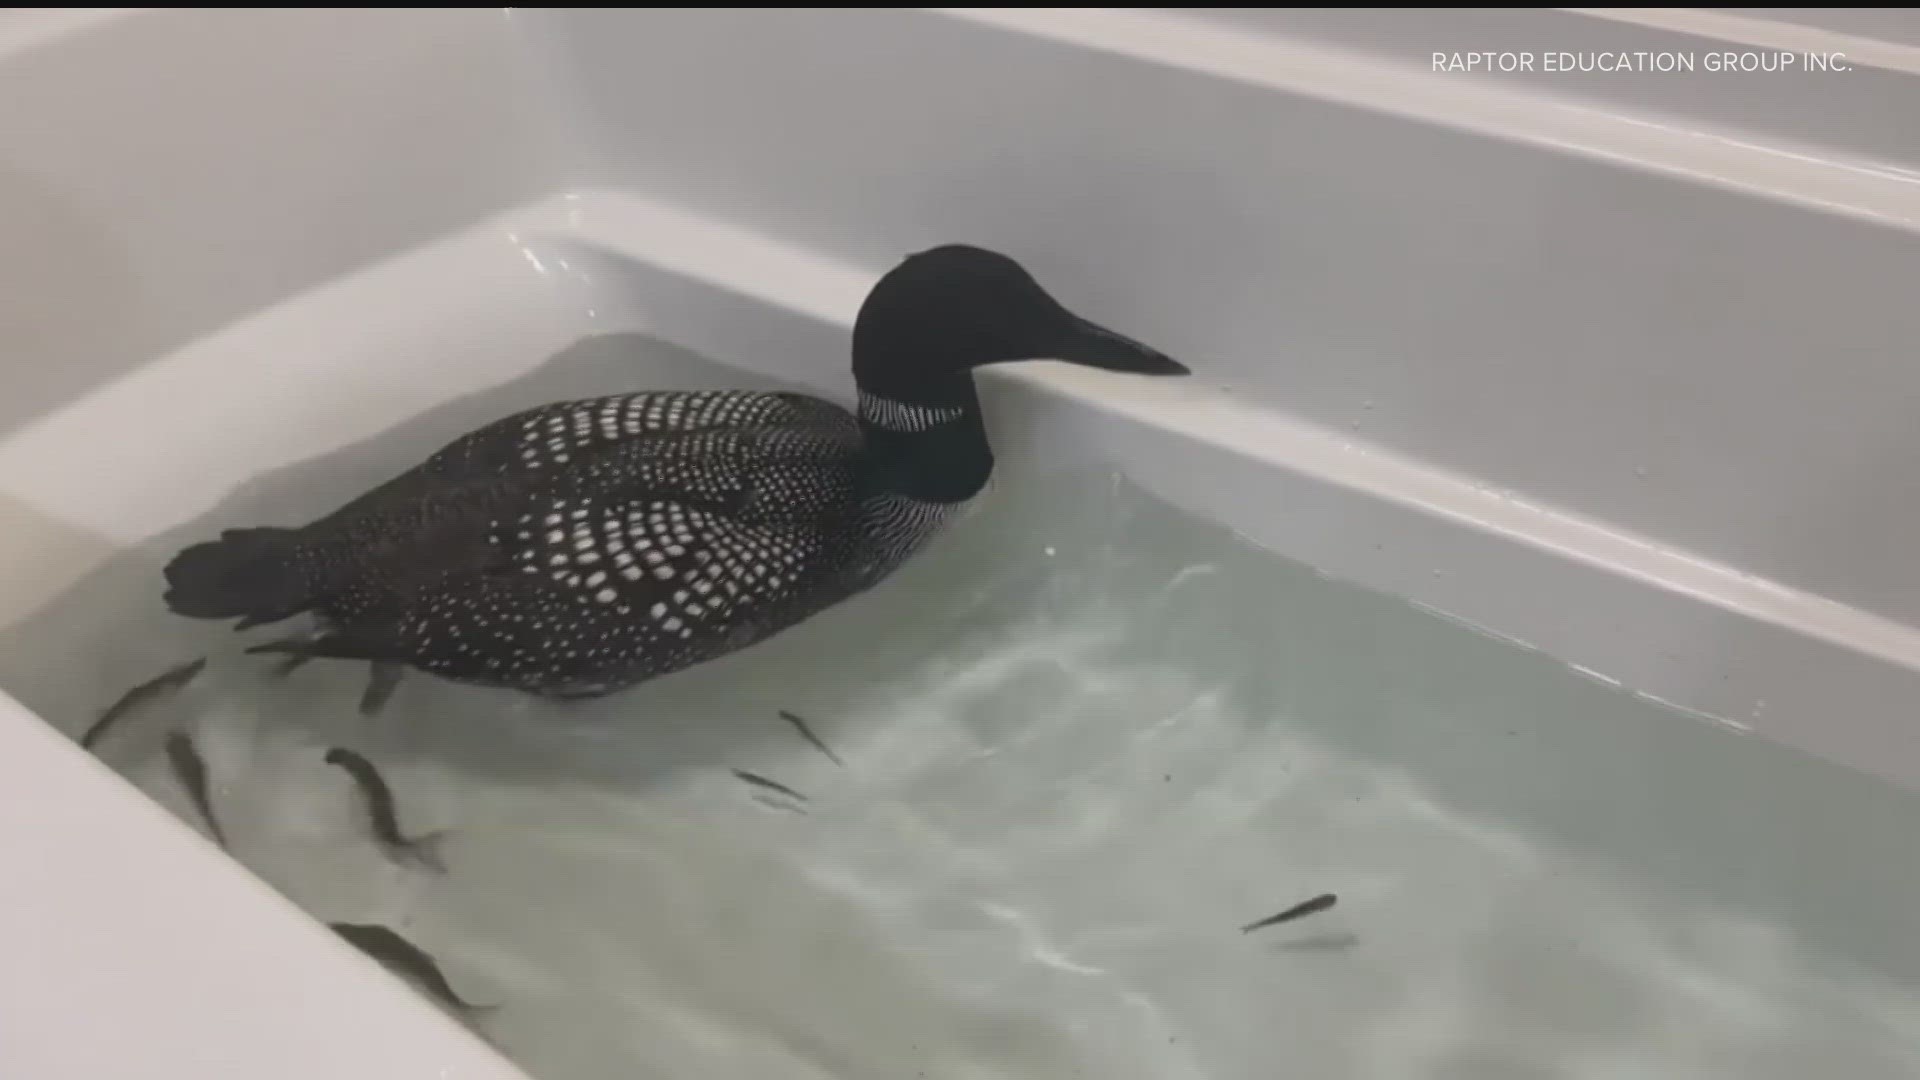 "Fallout" occurs when rare atmospheric conditions cause ice to form on a loon's body, causing them to crash land due to weight or inability to physically fly.